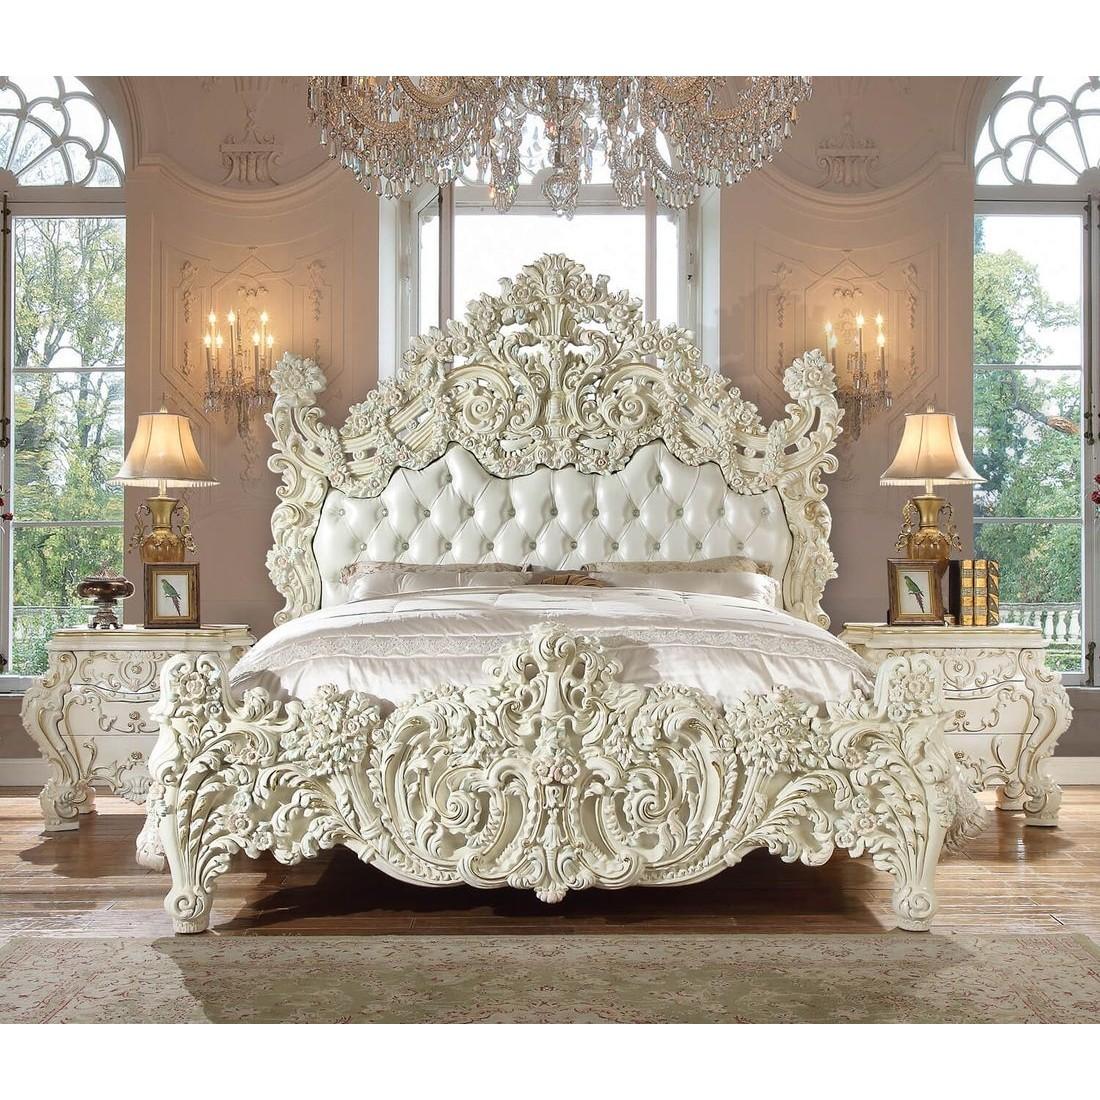 

    
Luxury Glossy White CAL King Bedroom Set 5Pcs Carved Wood Homey Design HD-8089
